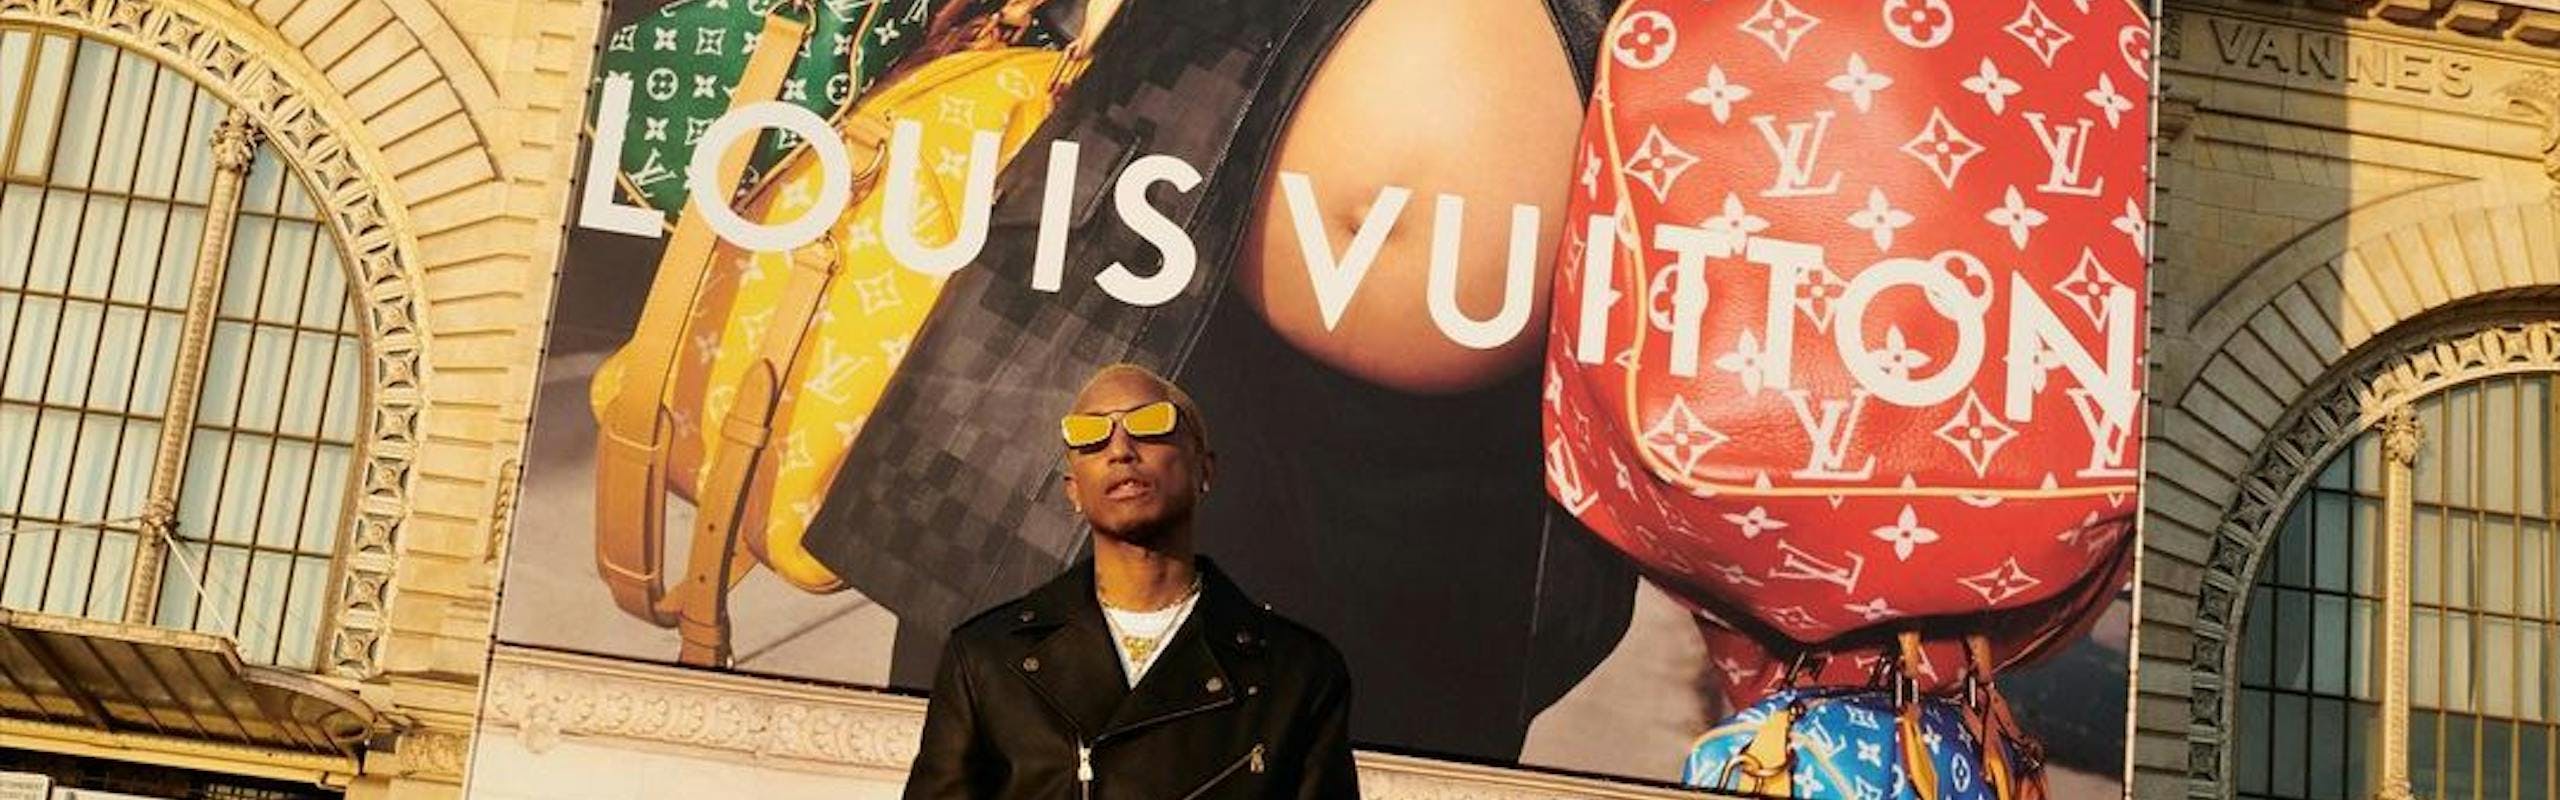 Pharrell Williams in front of a Louis Vuitton campaign.